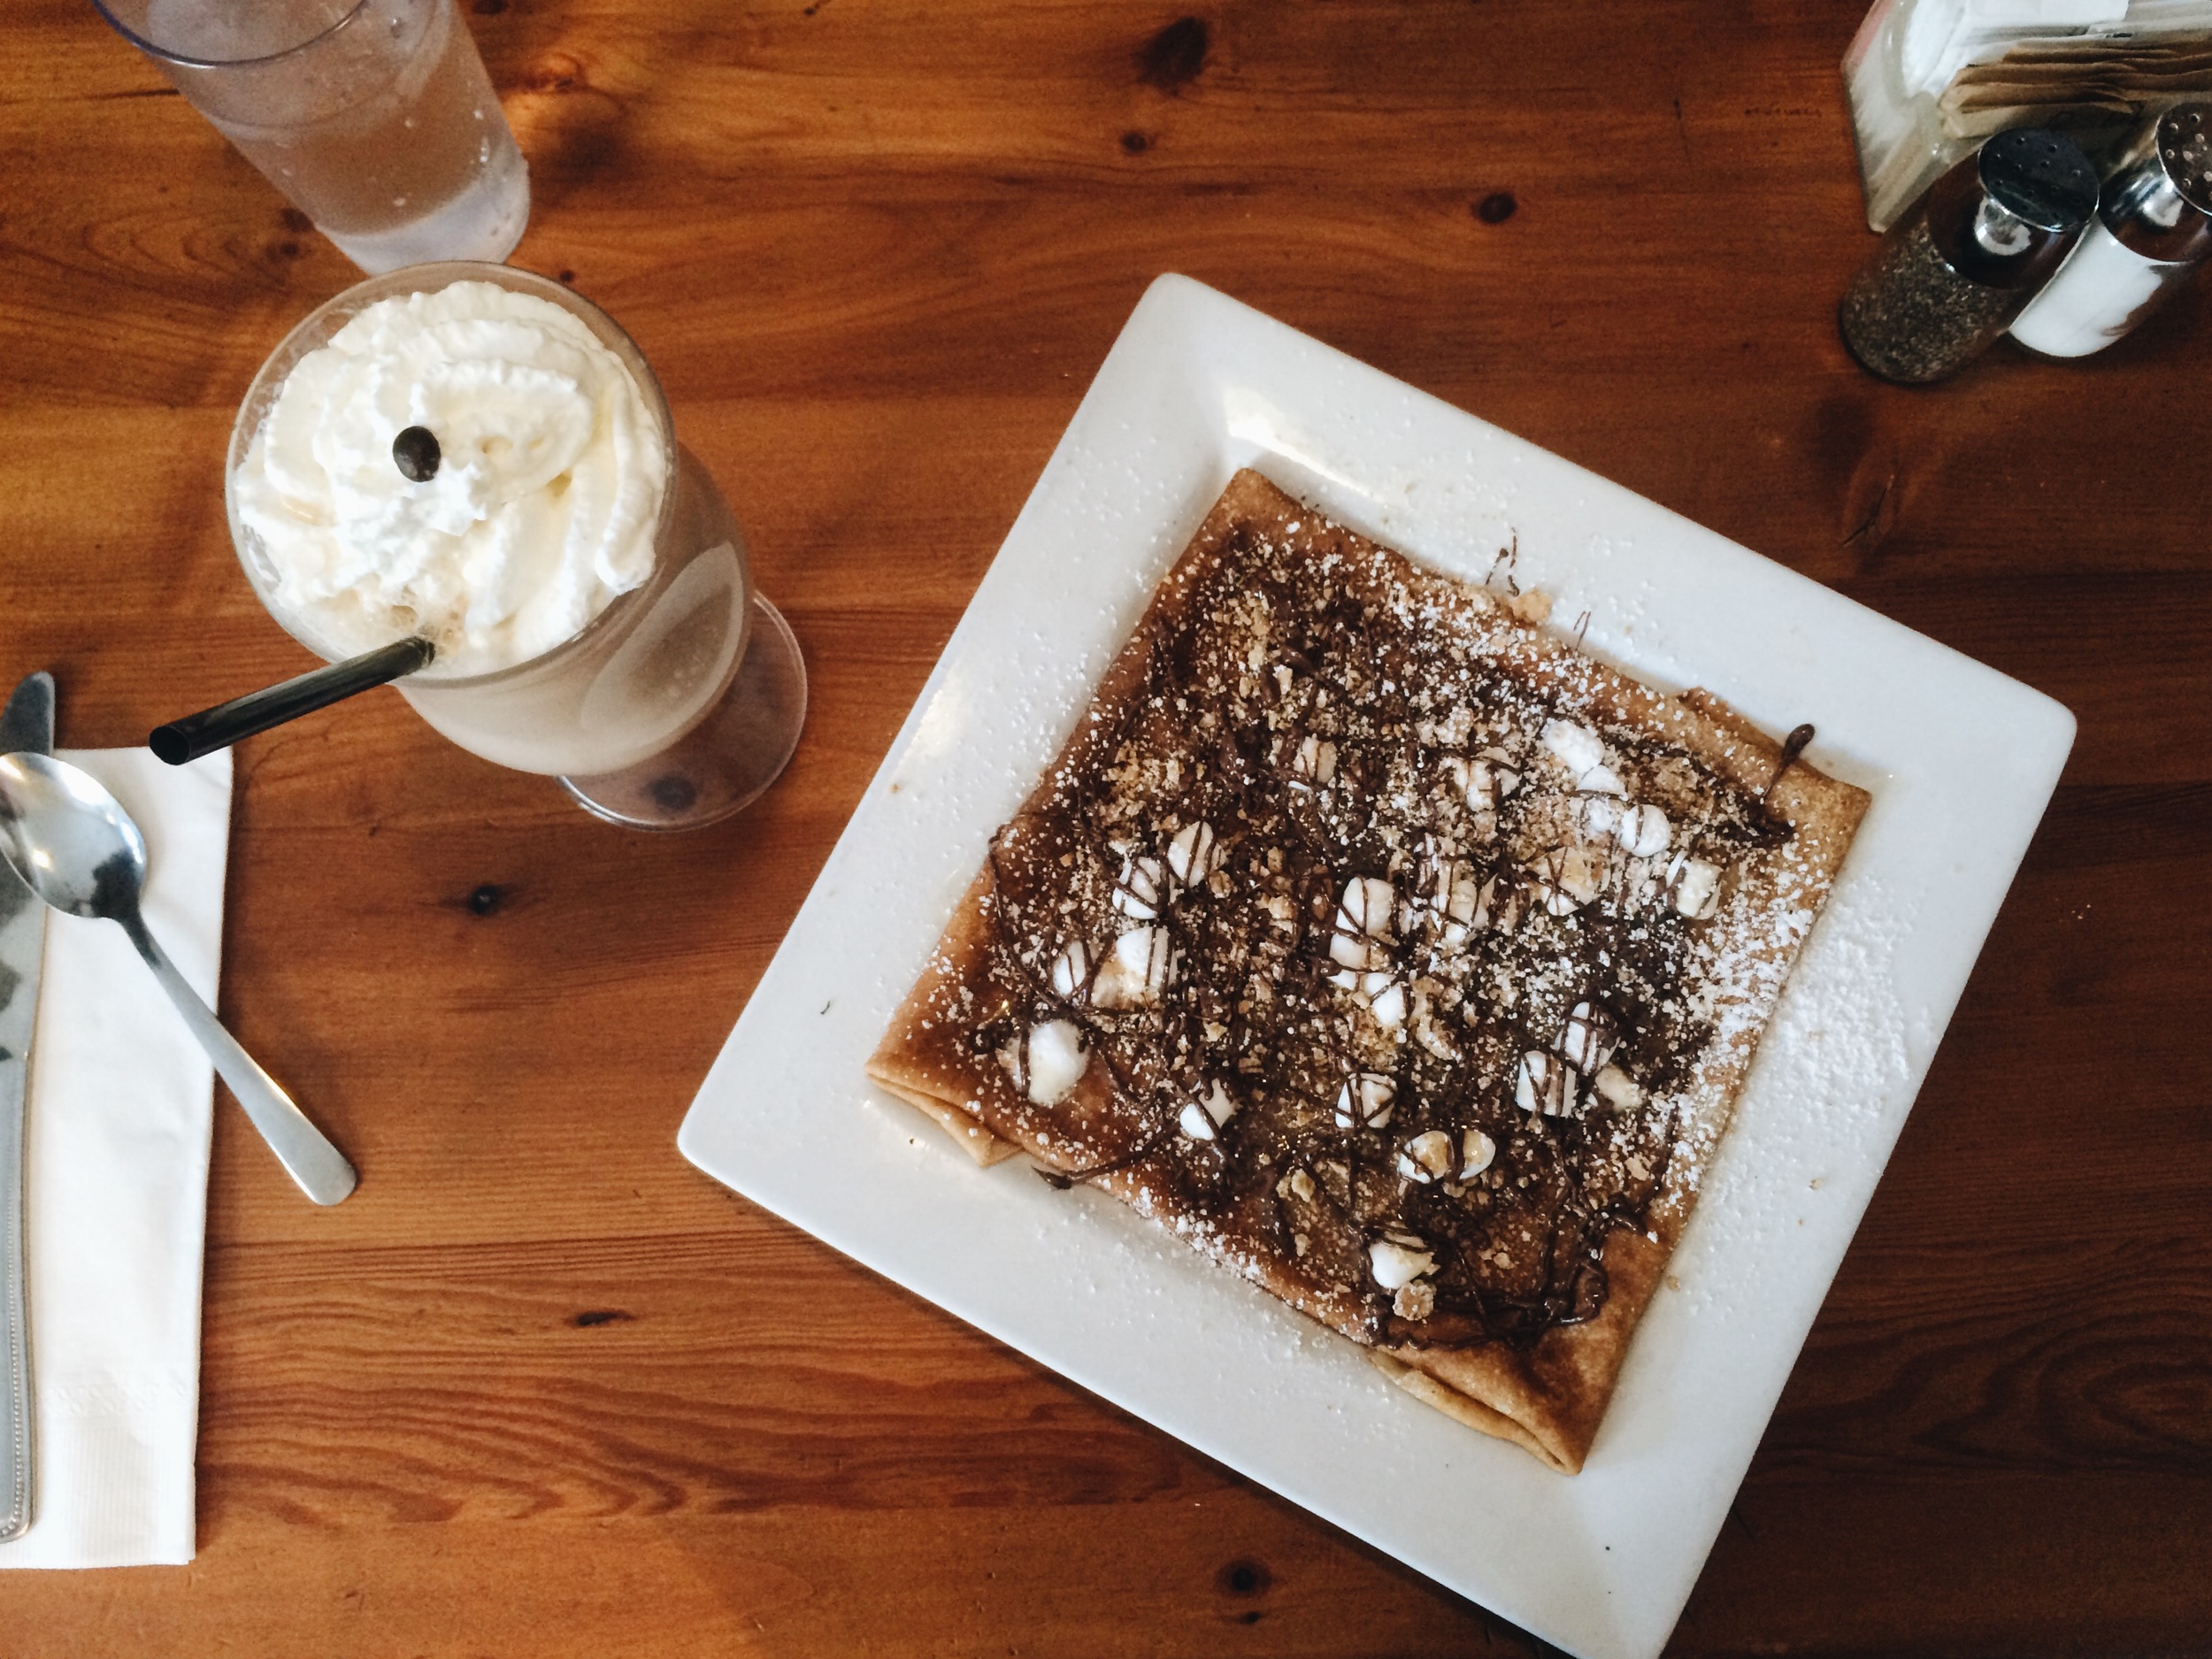  My S'mores crépe and an iced cappuccino. 